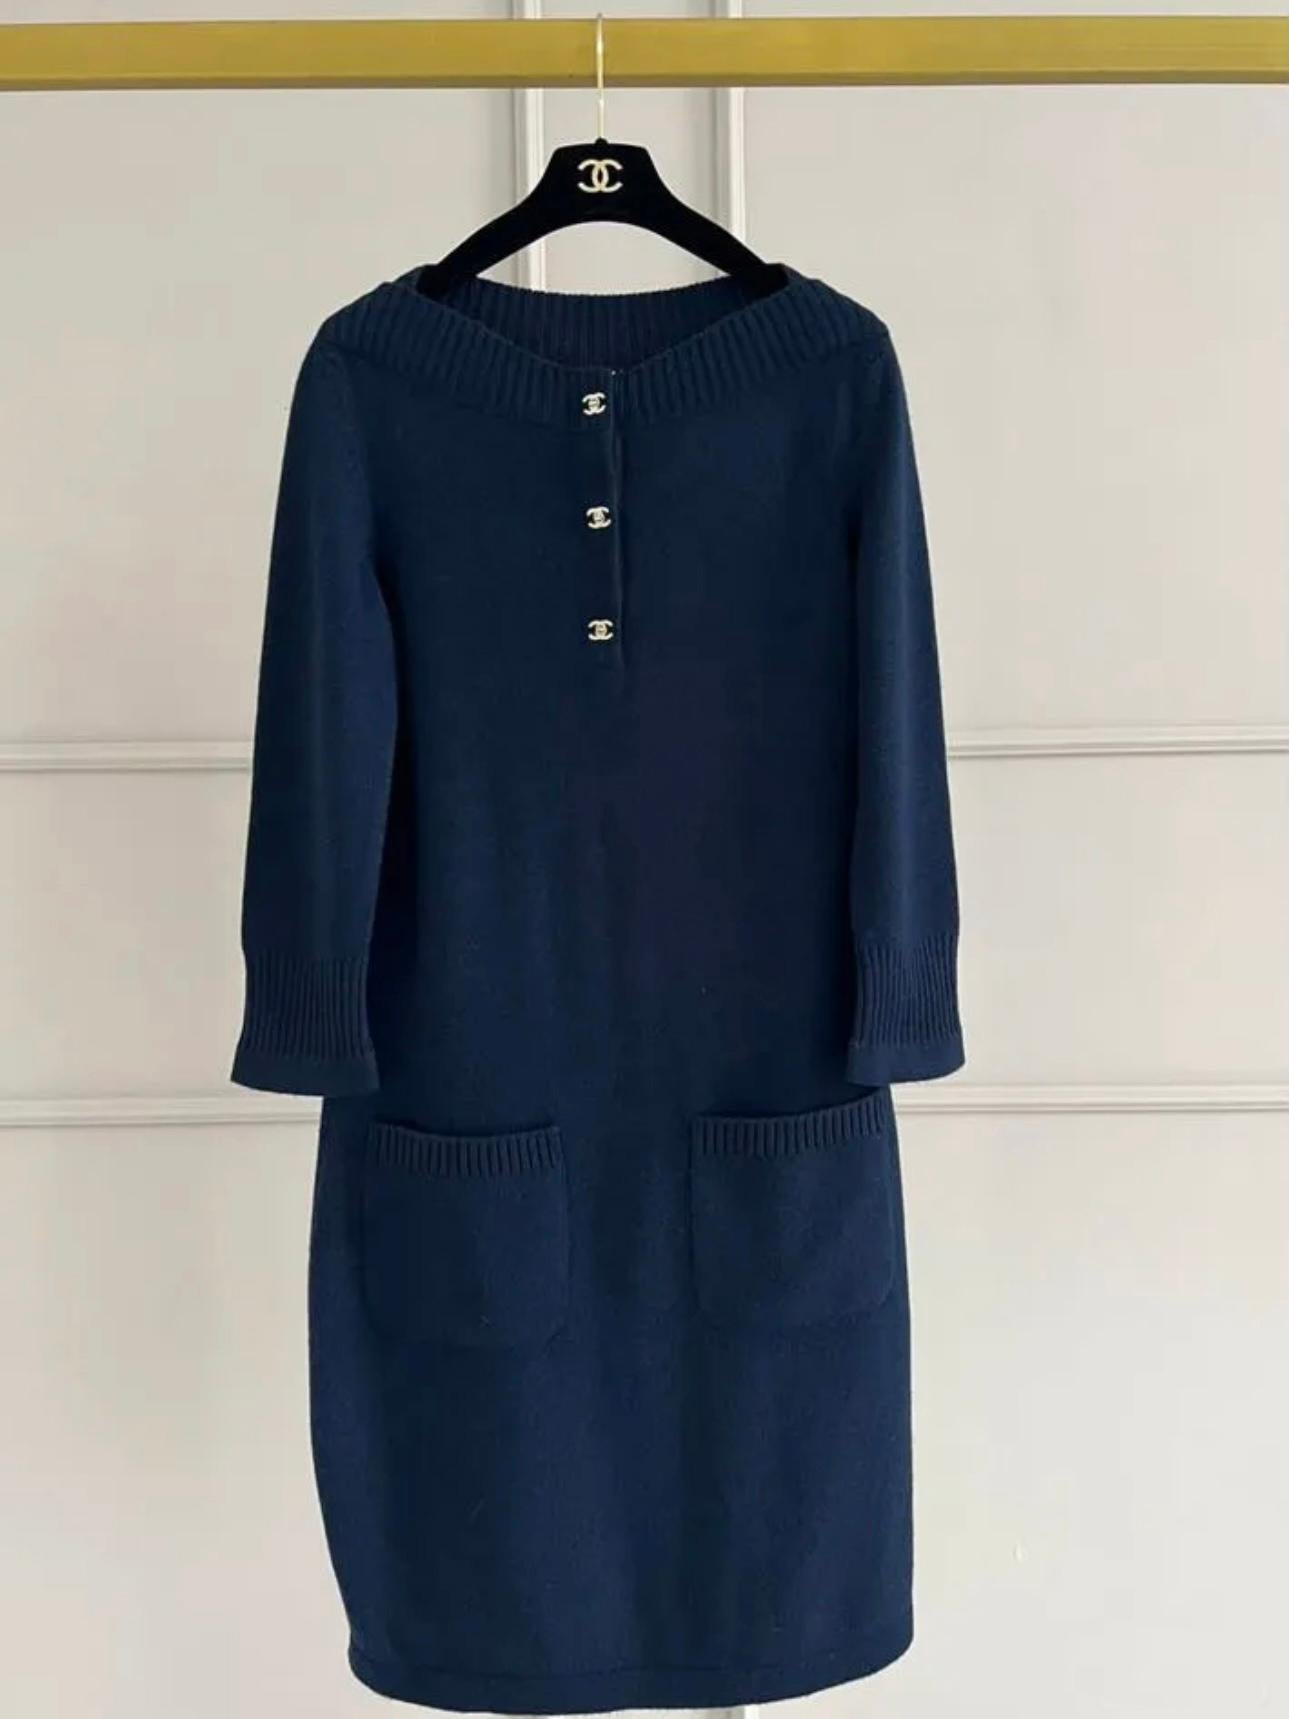 Chanel Iconic CC Turnlock Navy Cashmere Dress In Excellent Condition For Sale In Dubai, AE